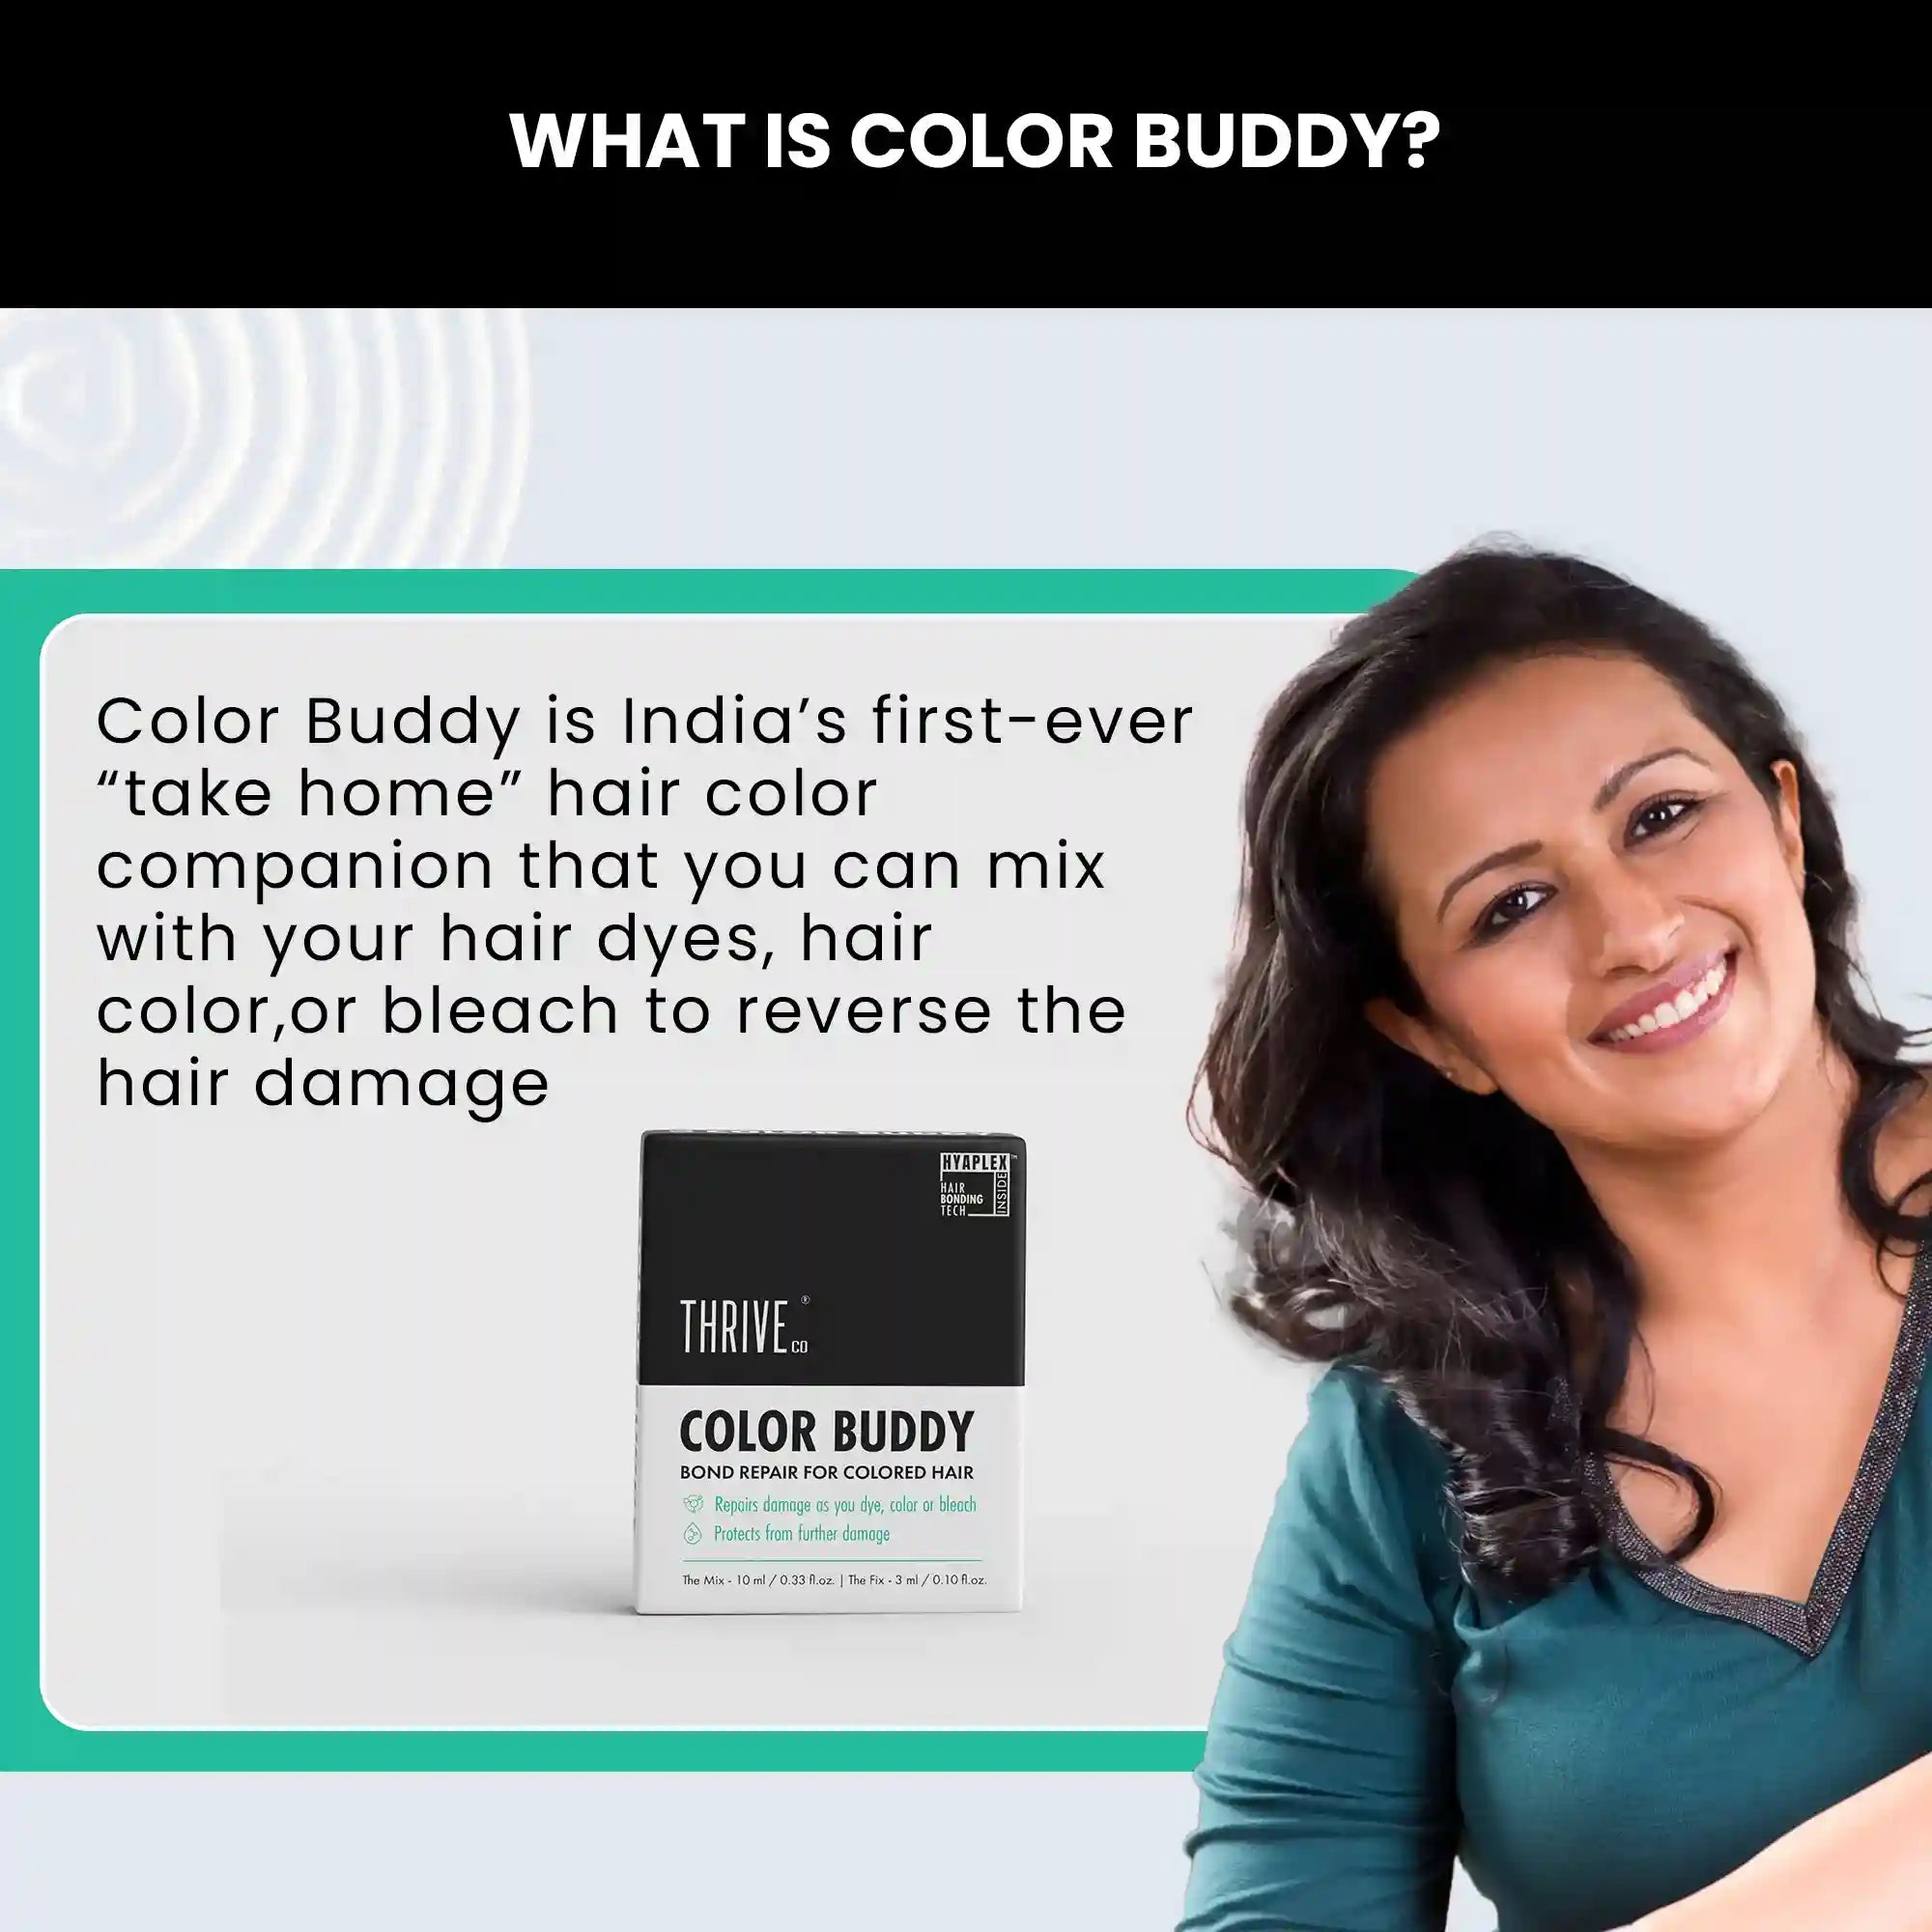 mix Color Buddy with your hair dye, hair color, or bleach to reverse the hair damage